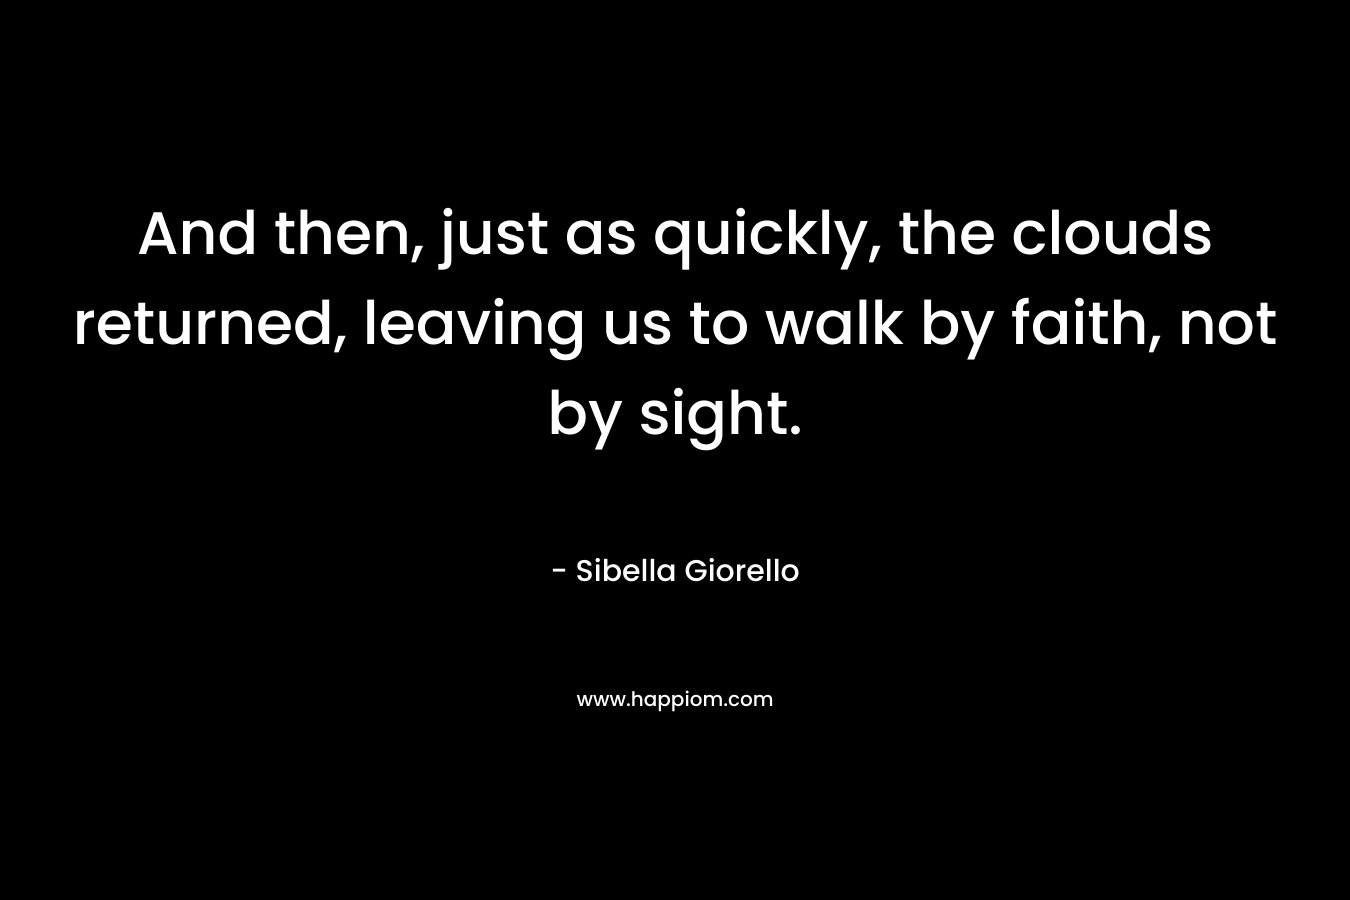 And then, just as quickly, the clouds returned, leaving us to walk by faith, not by sight. – Sibella Giorello